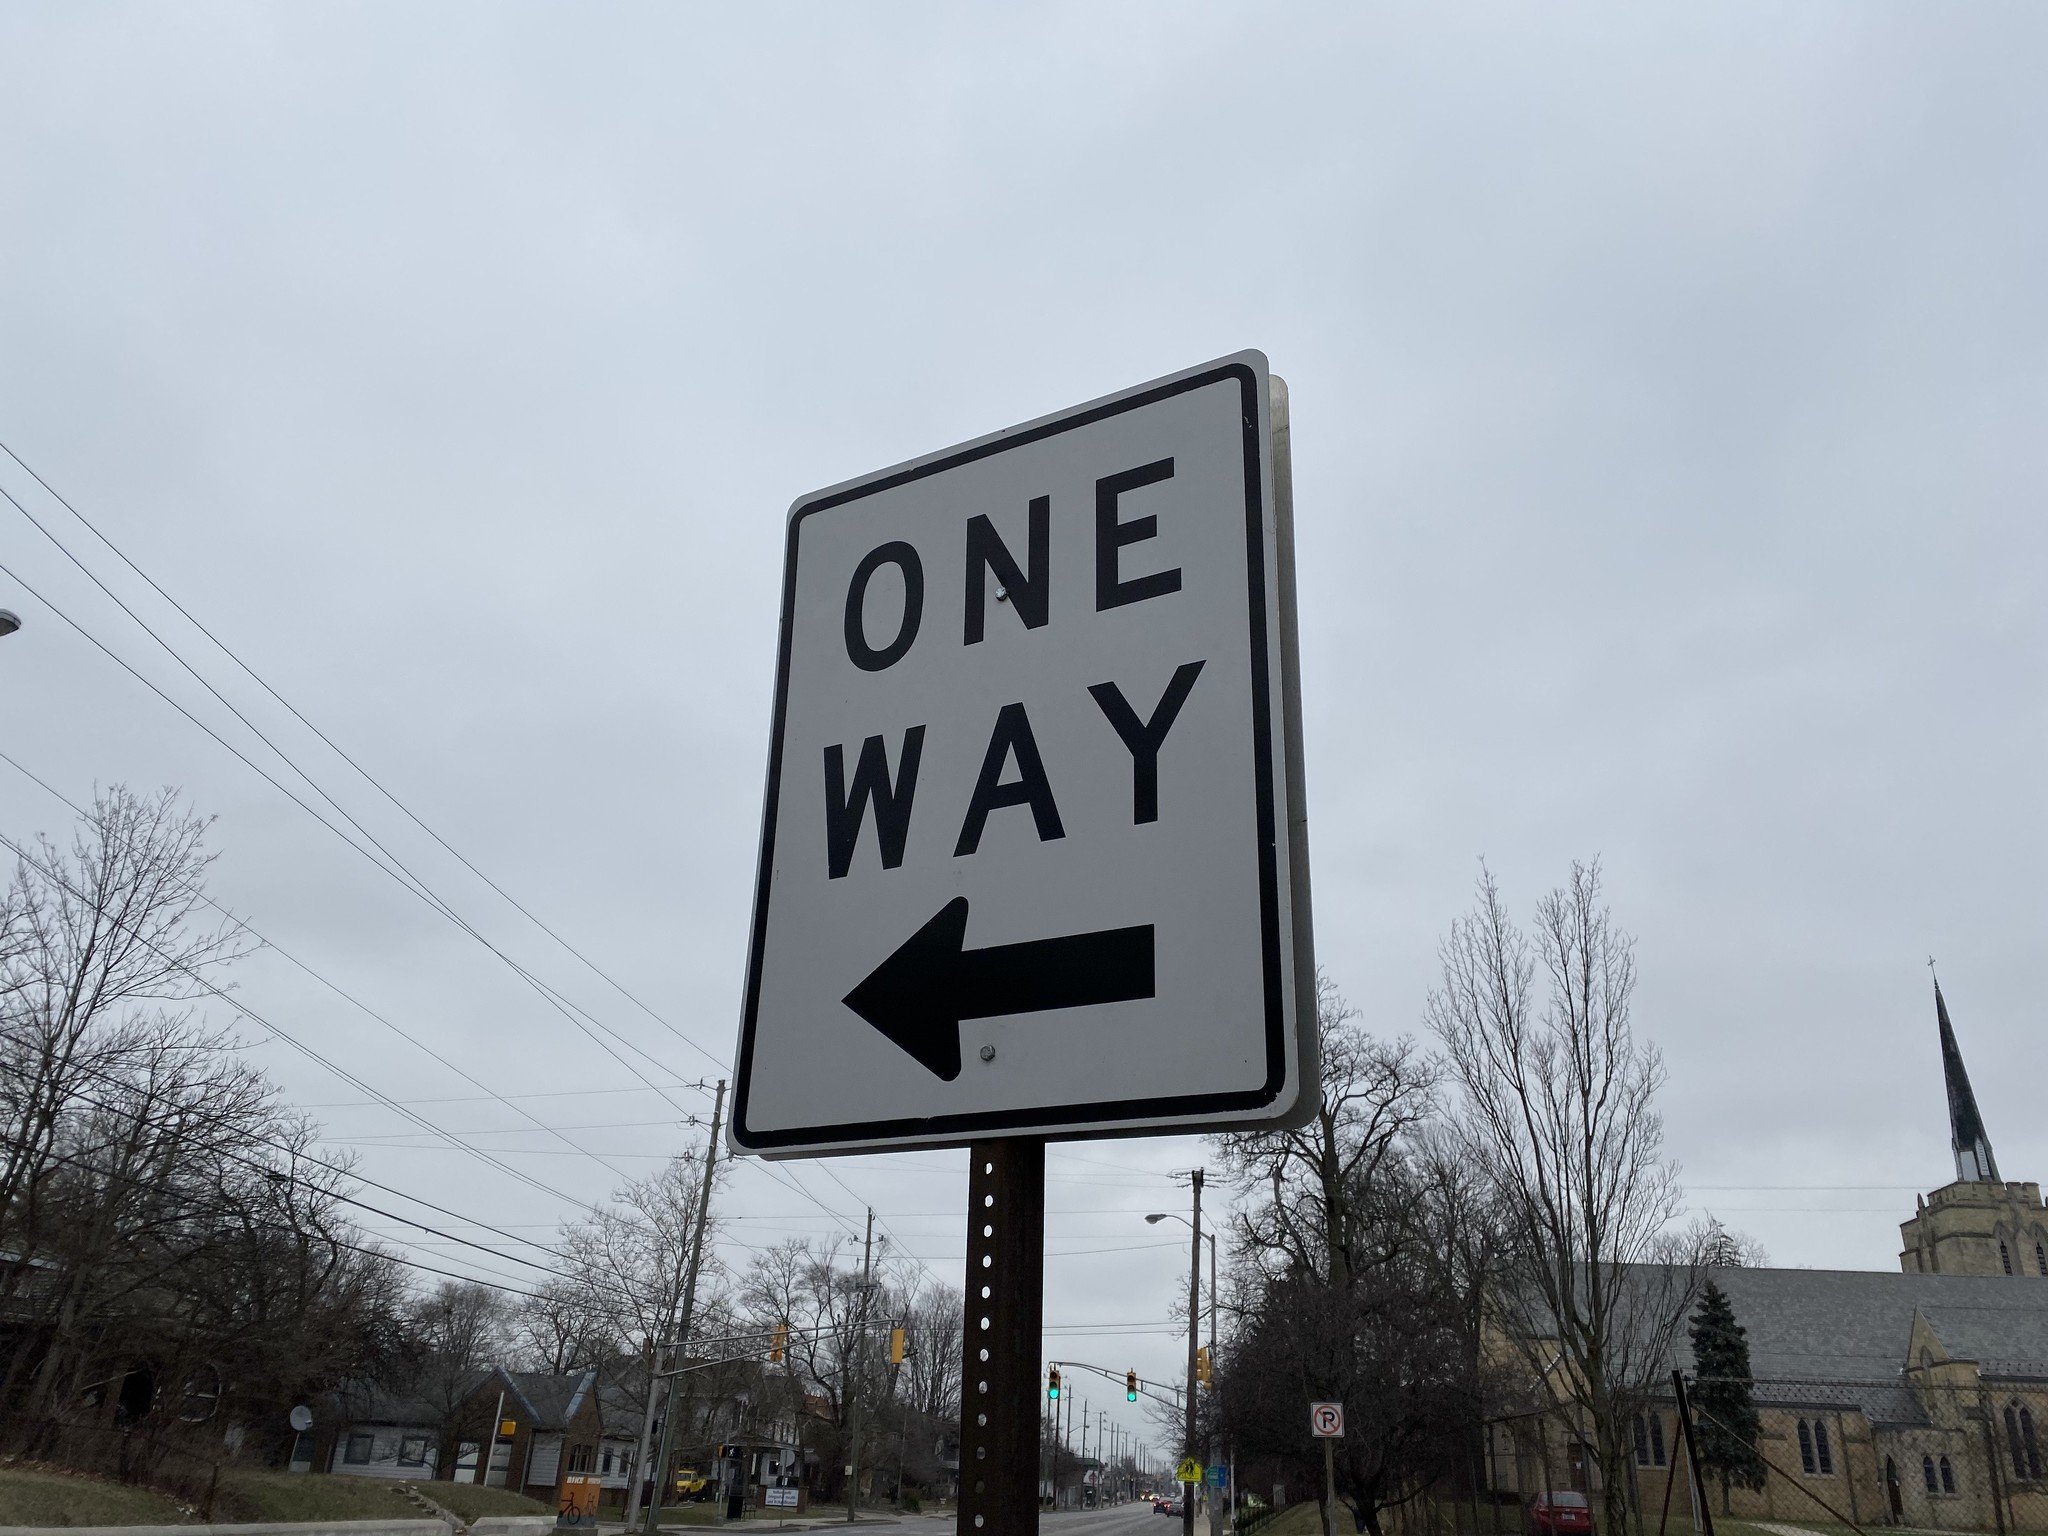 One Way sign shot on the iPhone 11